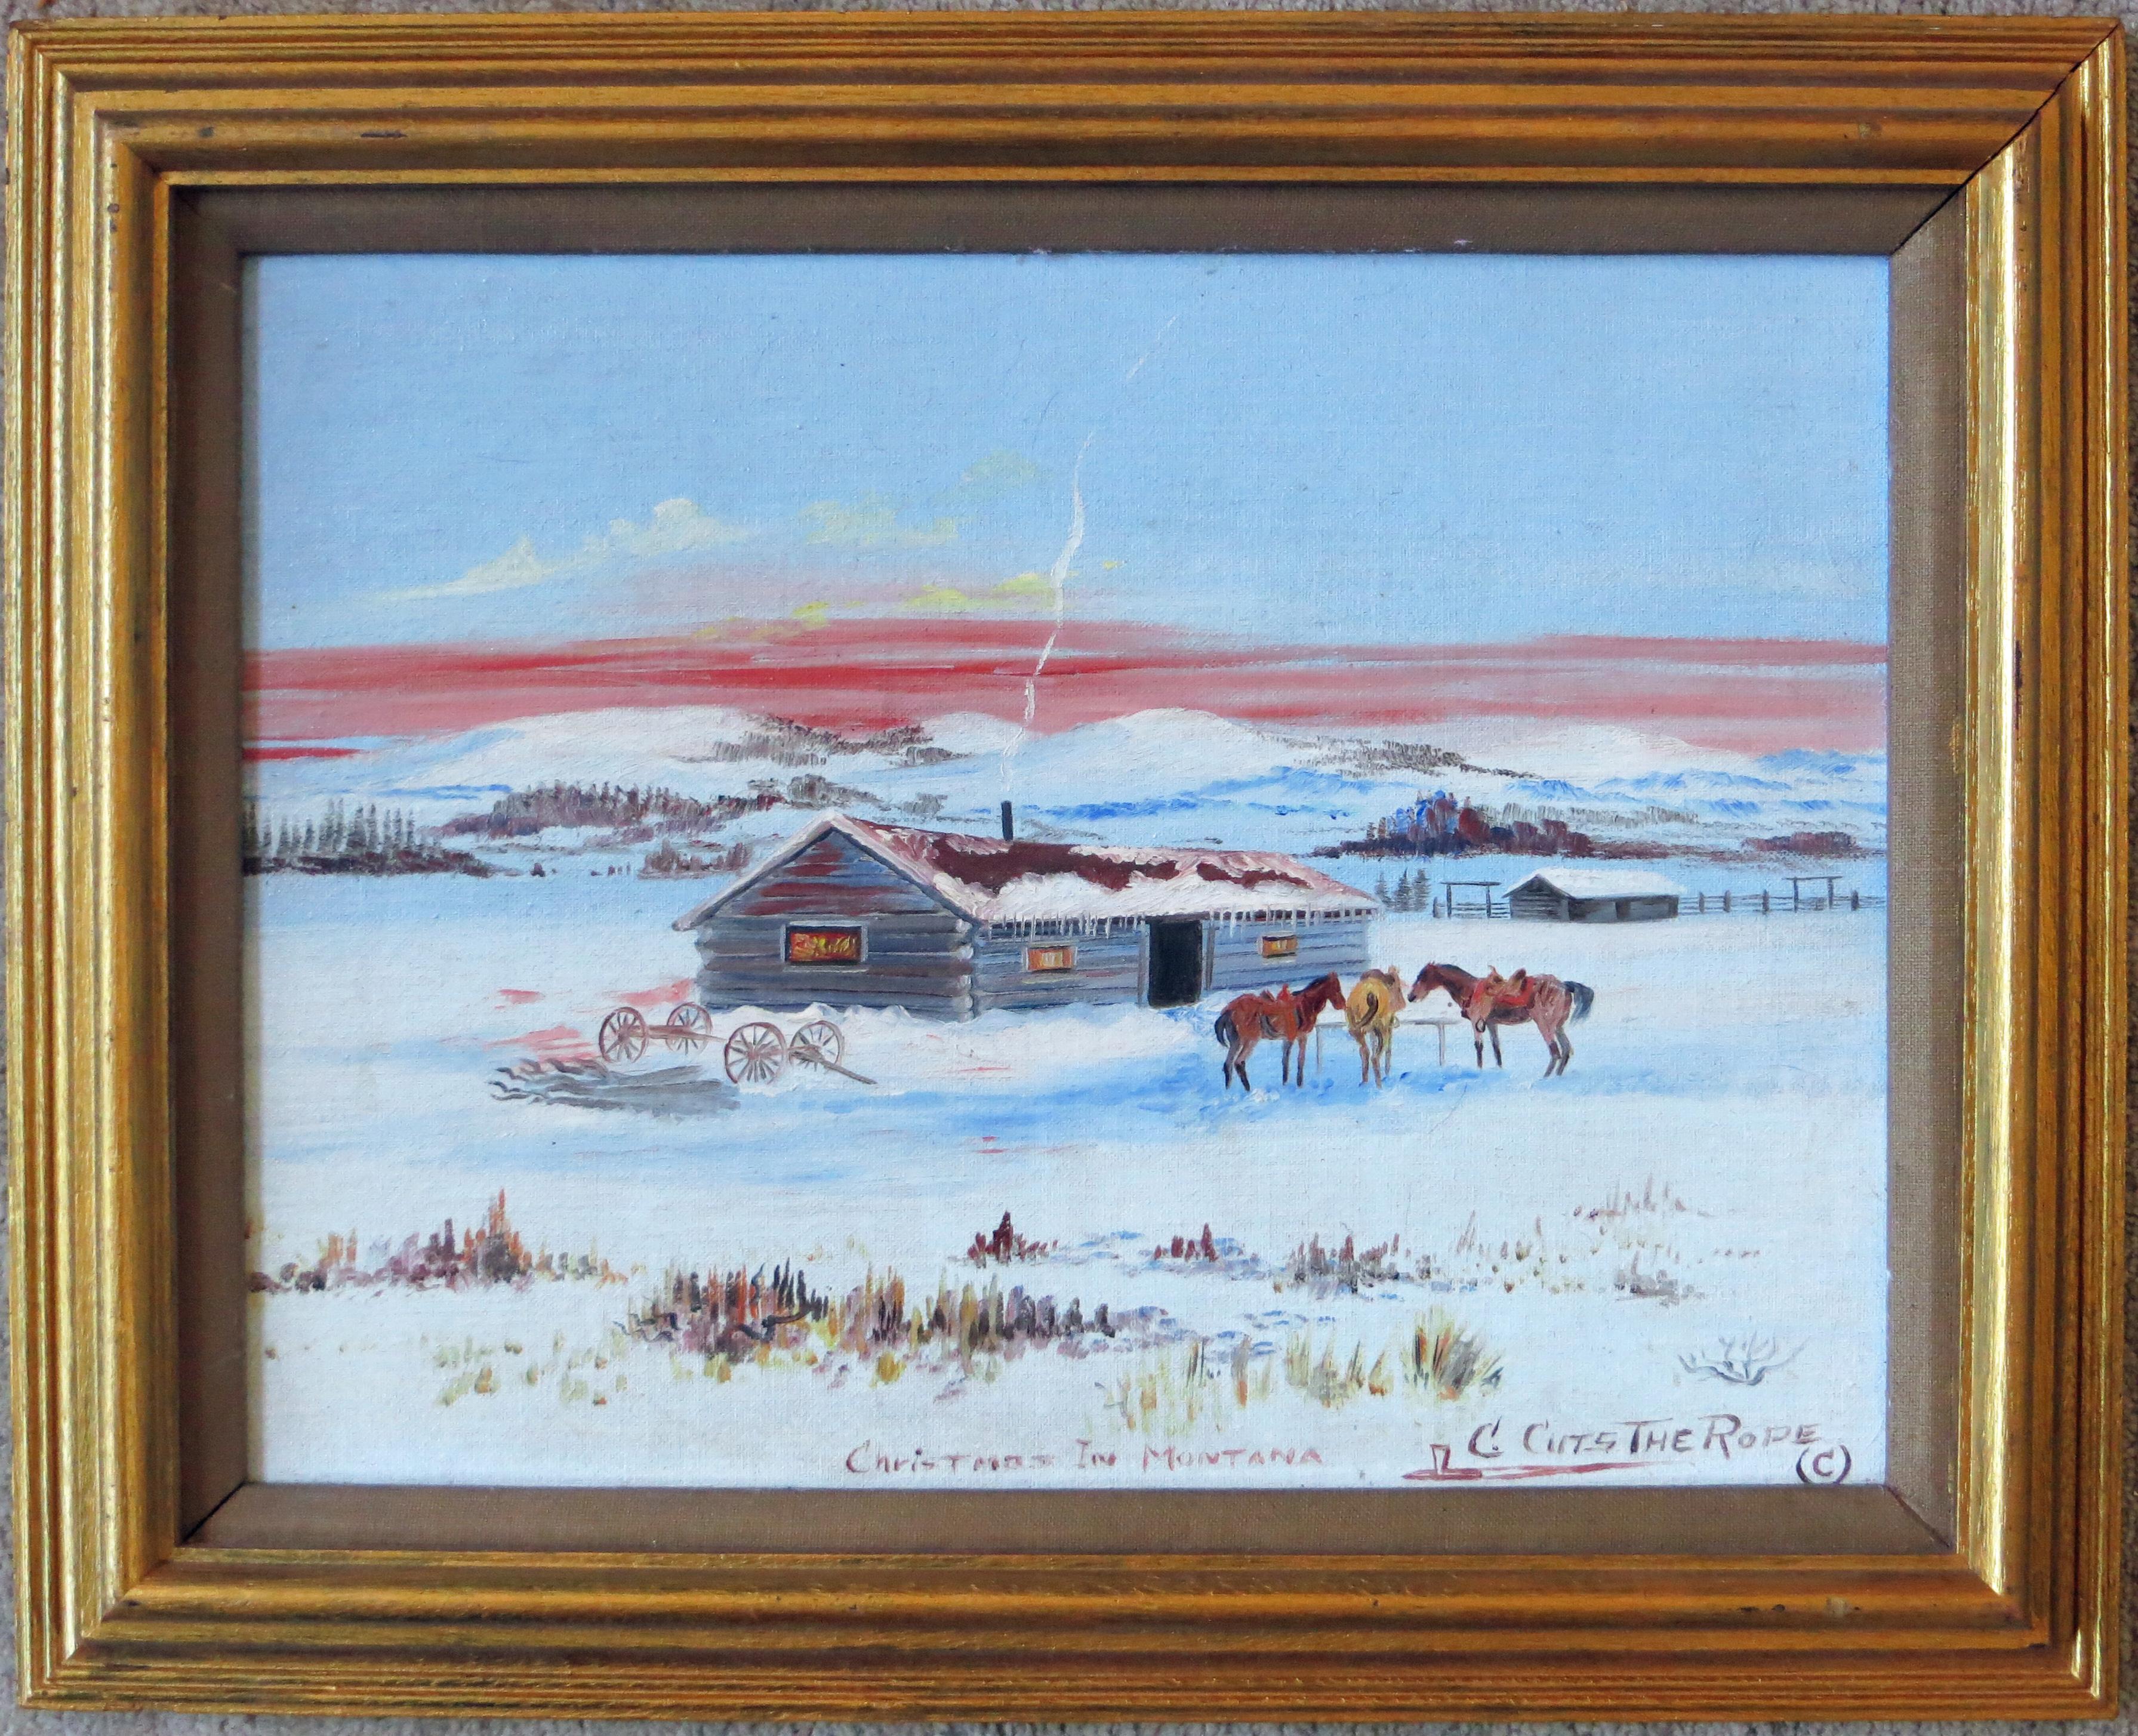 Christmas in Montana - Blue Landscape Painting by Clarence Cuts The Rope